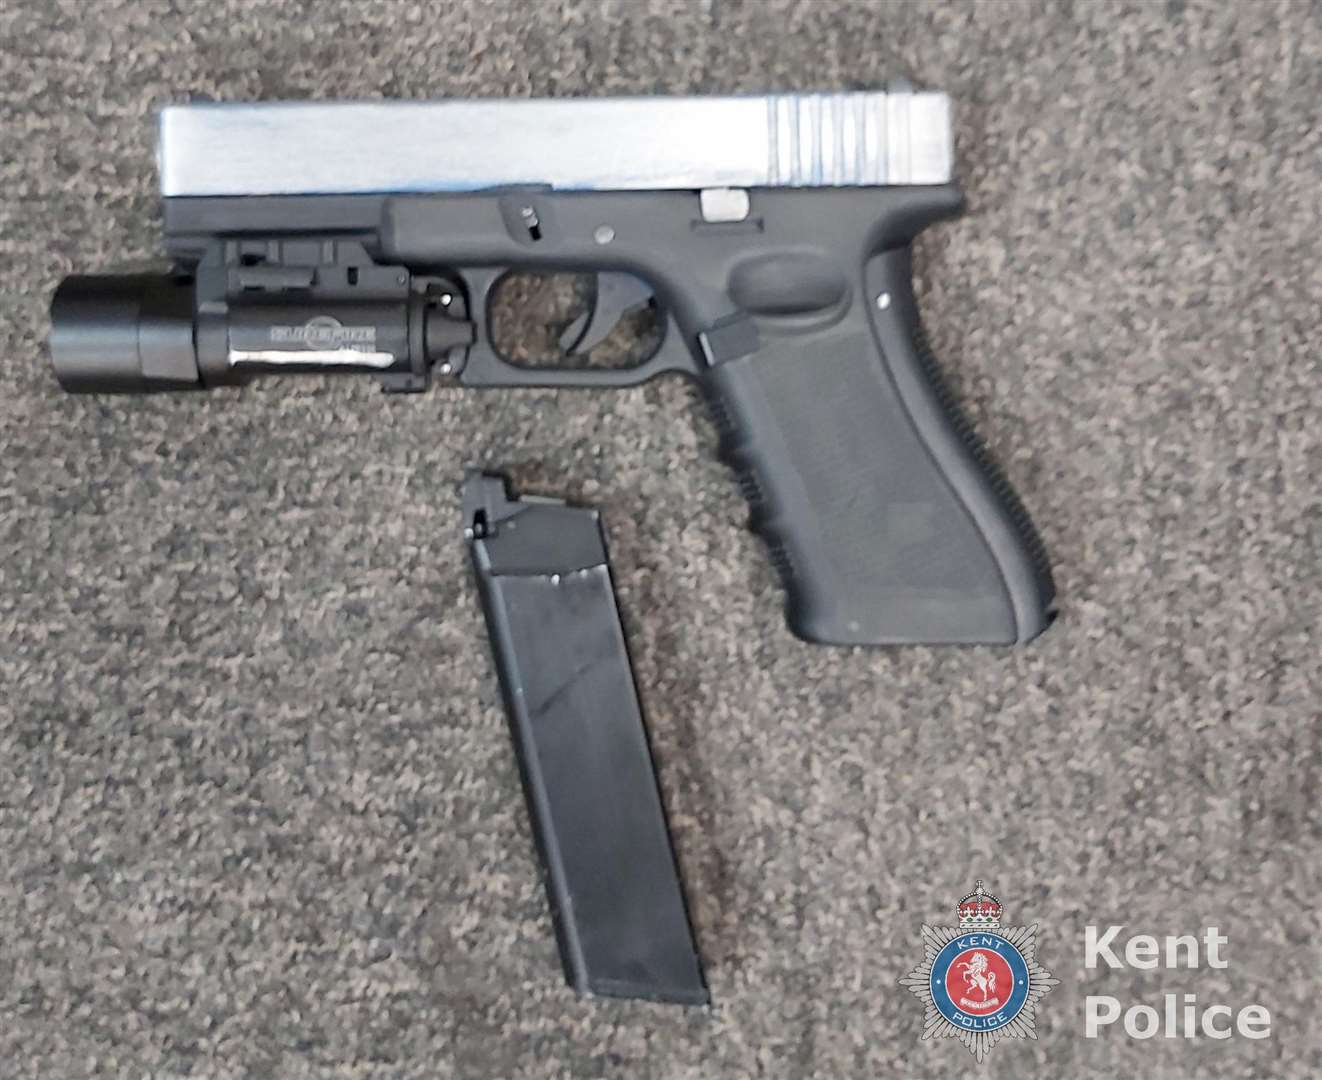 The imitation firearm which police seized in Canterbury. Picture: Kent Police